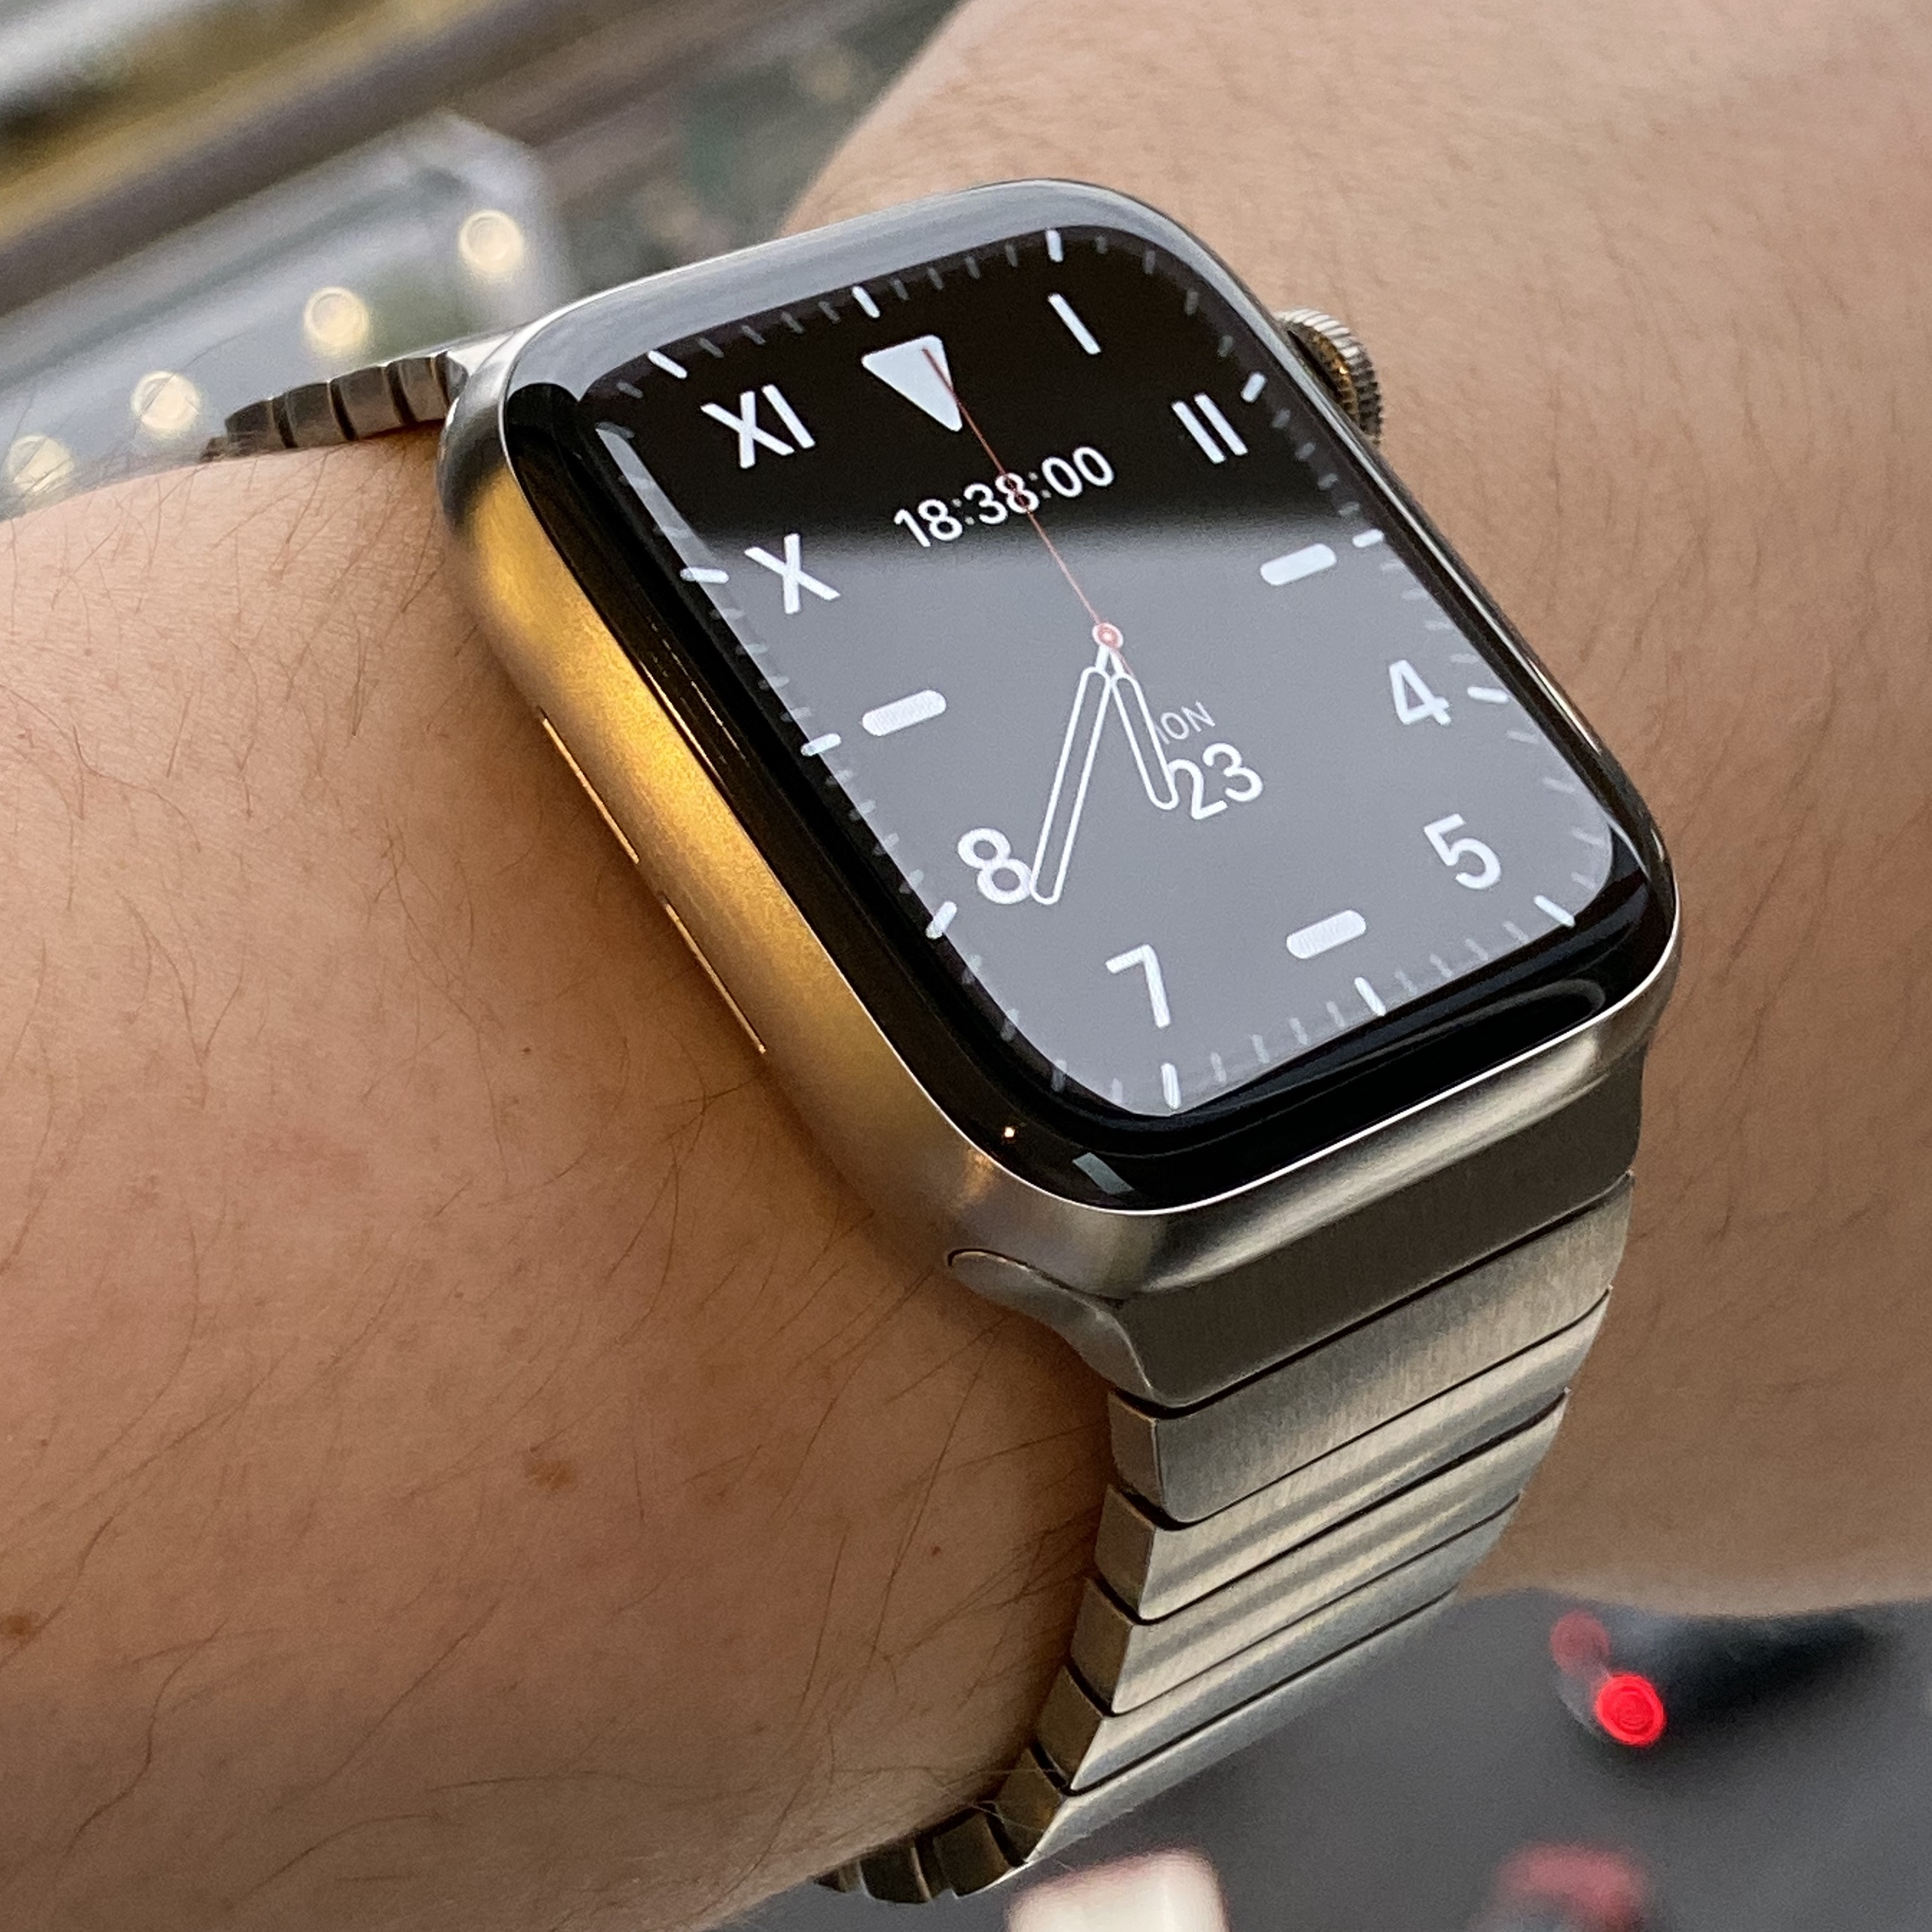 Show off your Apple Watch | Page 438 | MacRumors Forums